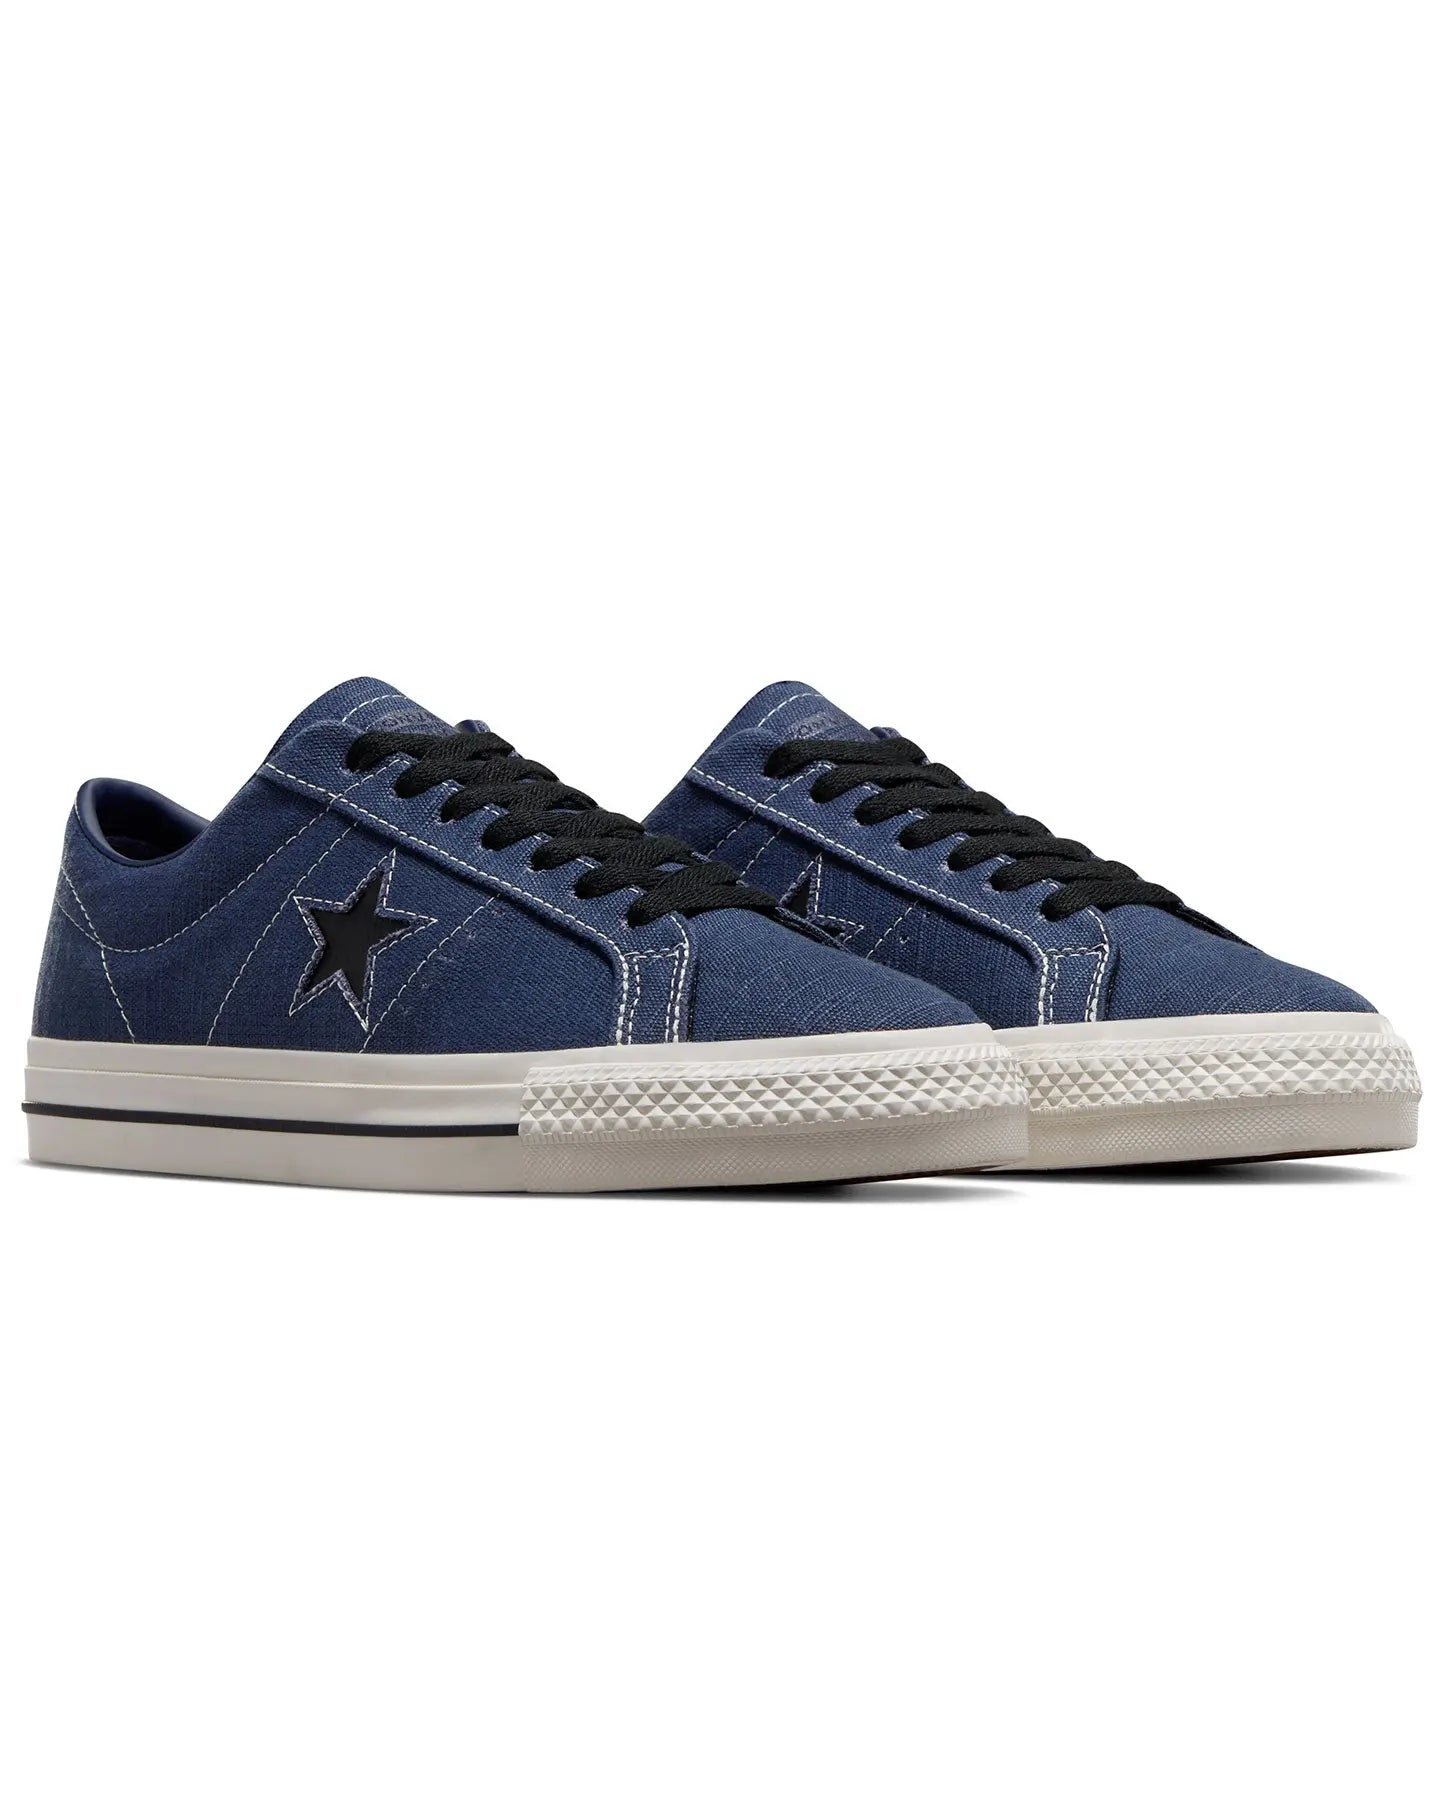 Cons One Star Pro - Uncharted Waters Blue / Egret / Black Footwear